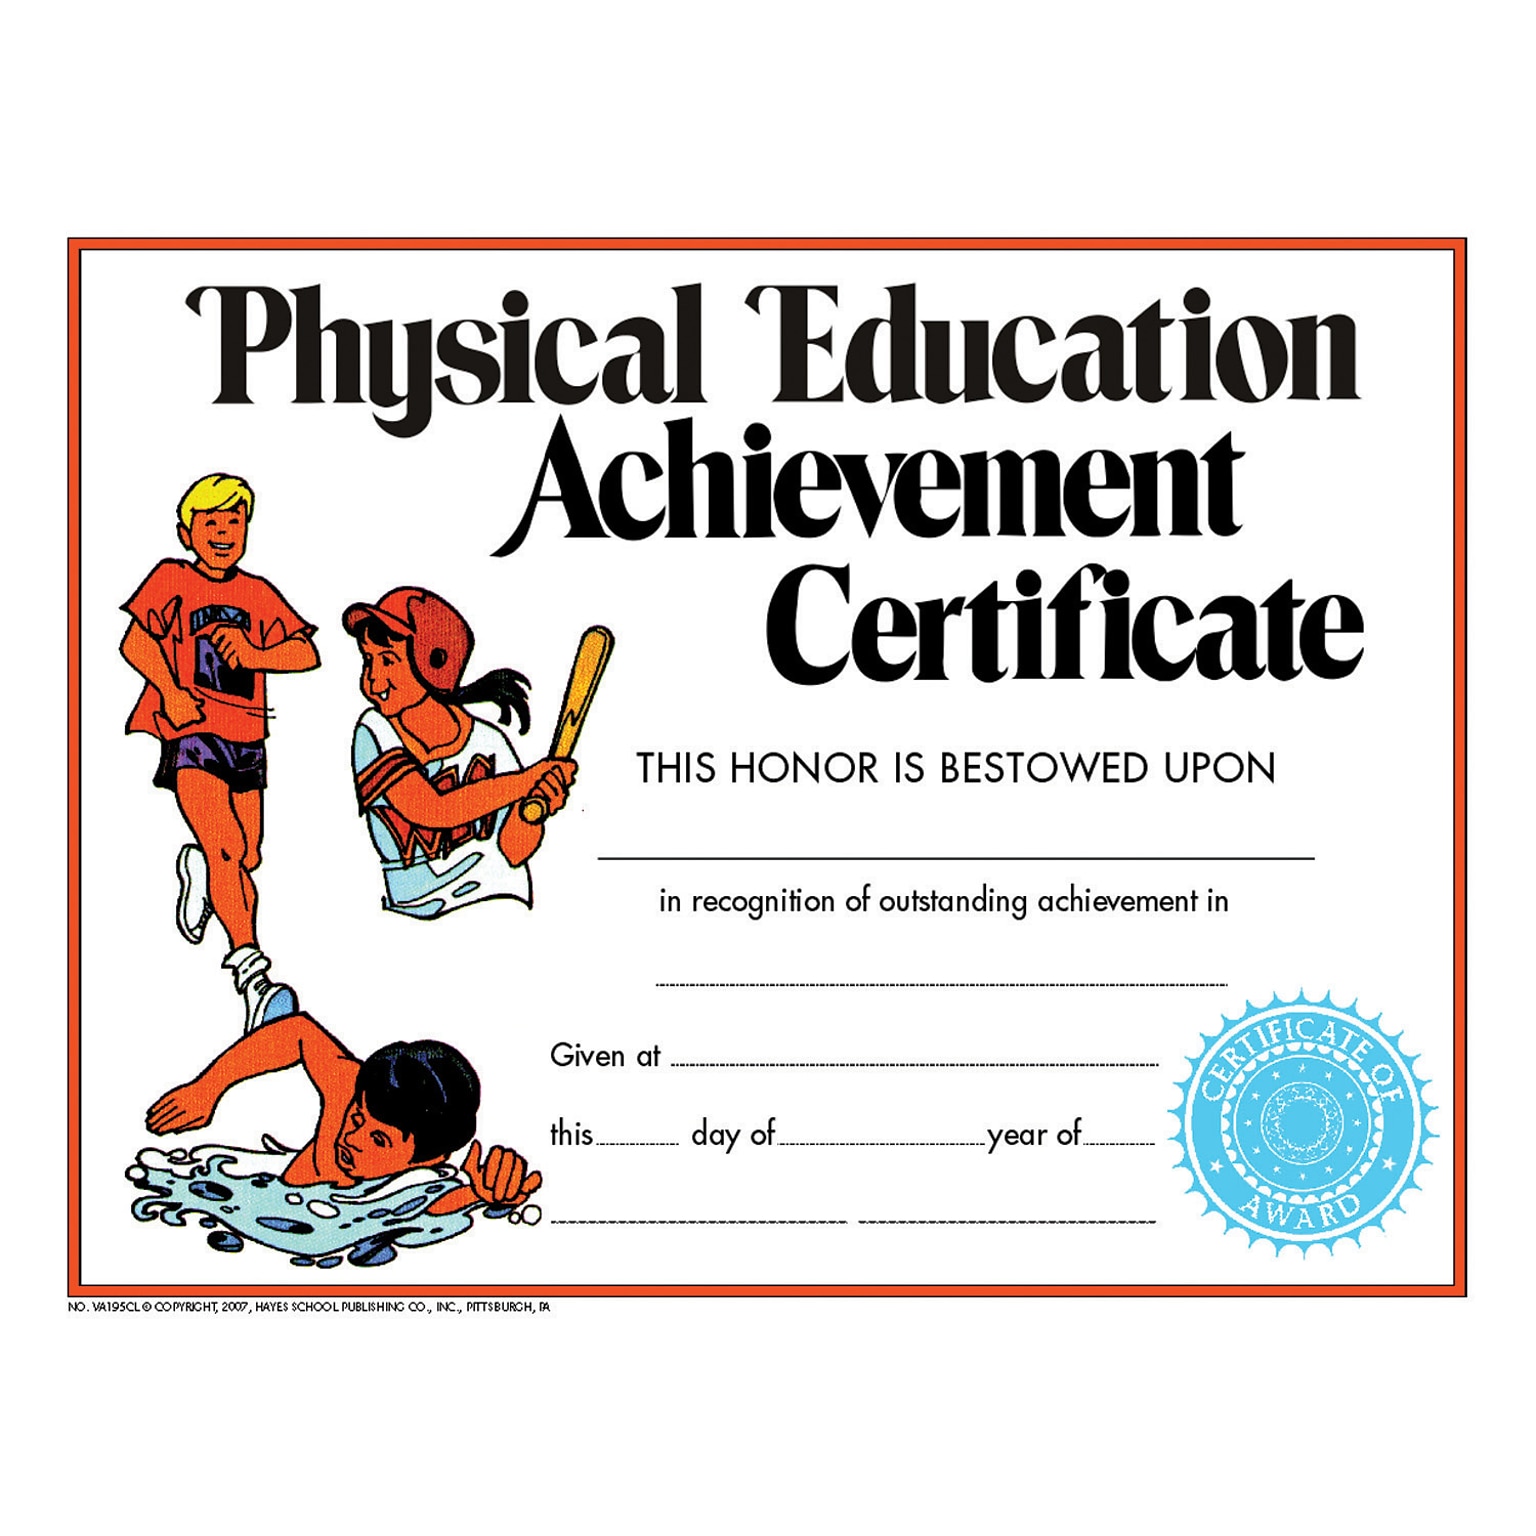 Hayes Physical Education Achievement Certificate, 8.5 x 11, Pack of 30 (H-VA195CL)